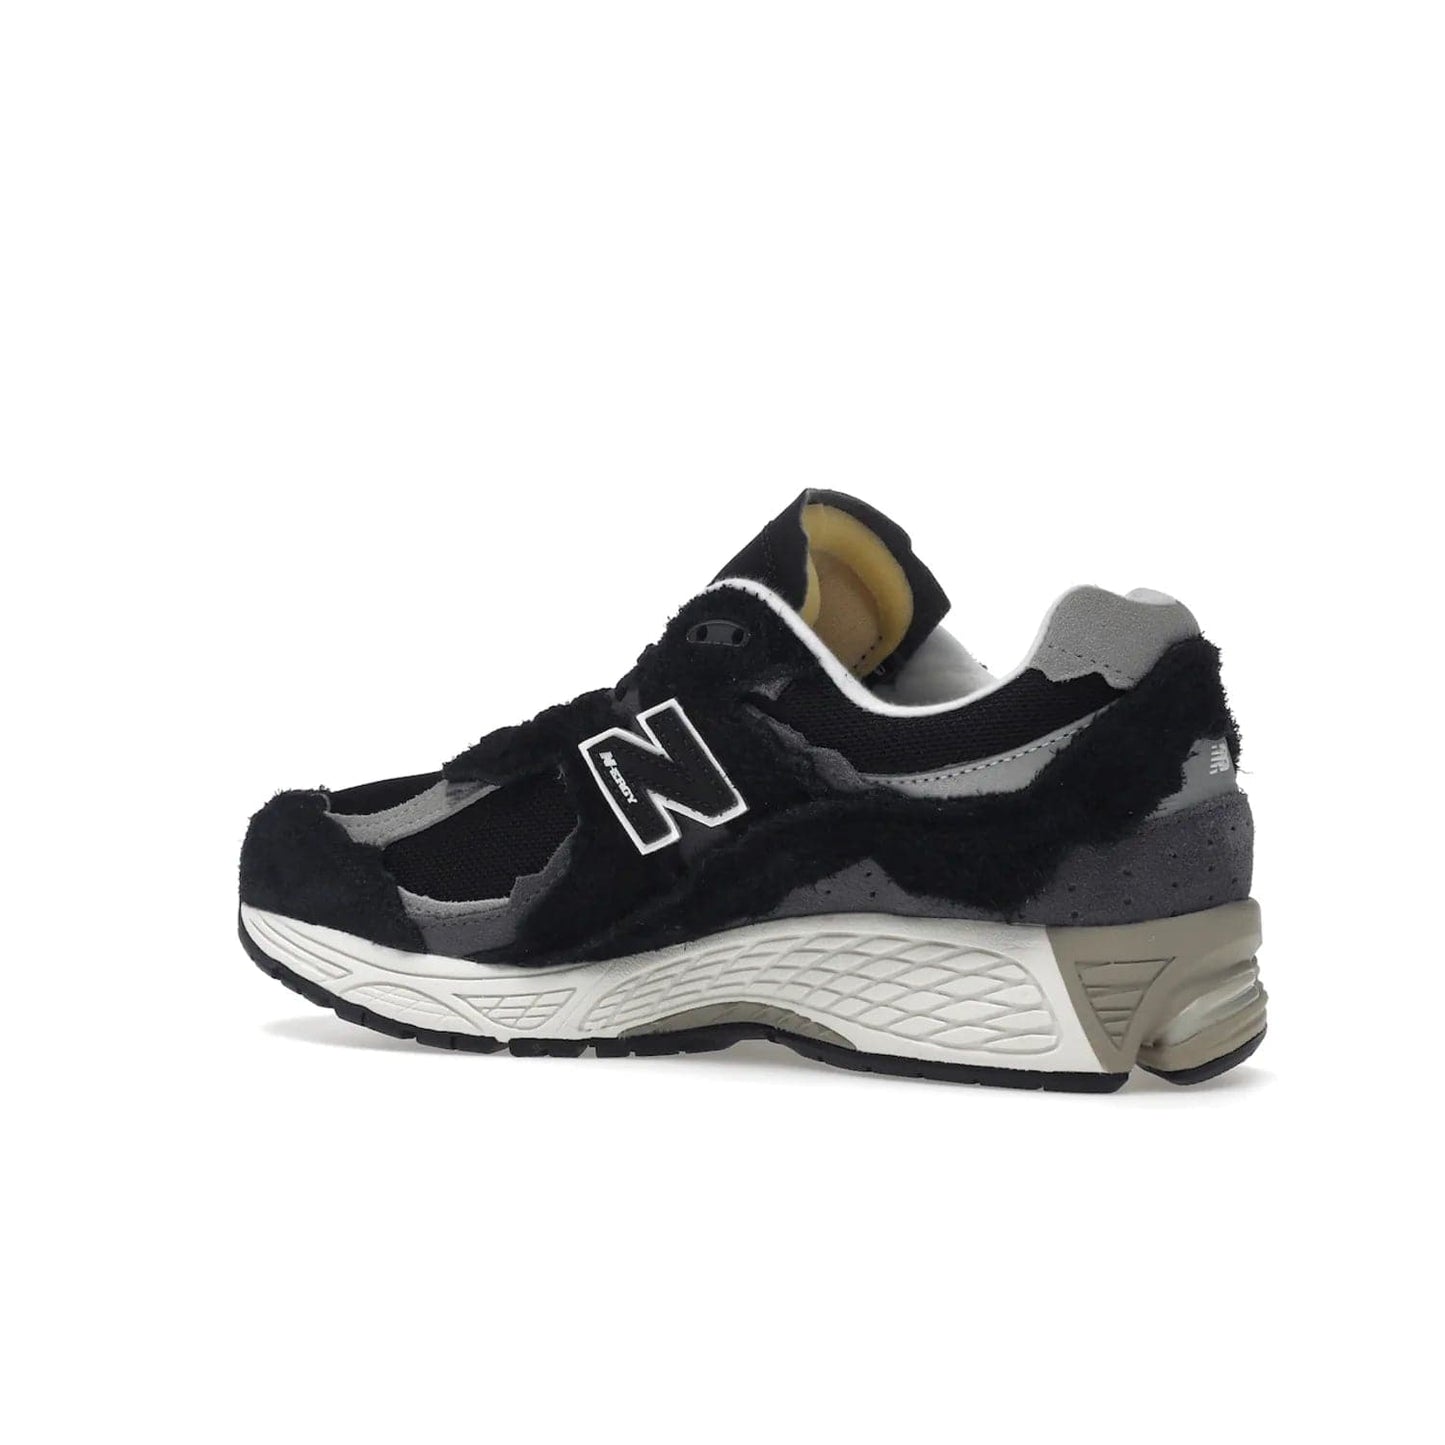 New Balance 2002R Protection Pack Black Grey - Image 22 - Only at www.BallersClubKickz.com - Look stylish in the New Balance 2002R Protection Pack Black Grey. Uppers constructed from premium materials like mesh and synthetic overlays. Iconic "N" emblem appears in white and black. ABZORB midsole for shock absorption and responsiveness. Black outsole for grip and traction. Lacing system offers customized fit and cushioned tongue and collar offer comfort and stability. Step up your style with this must-hav